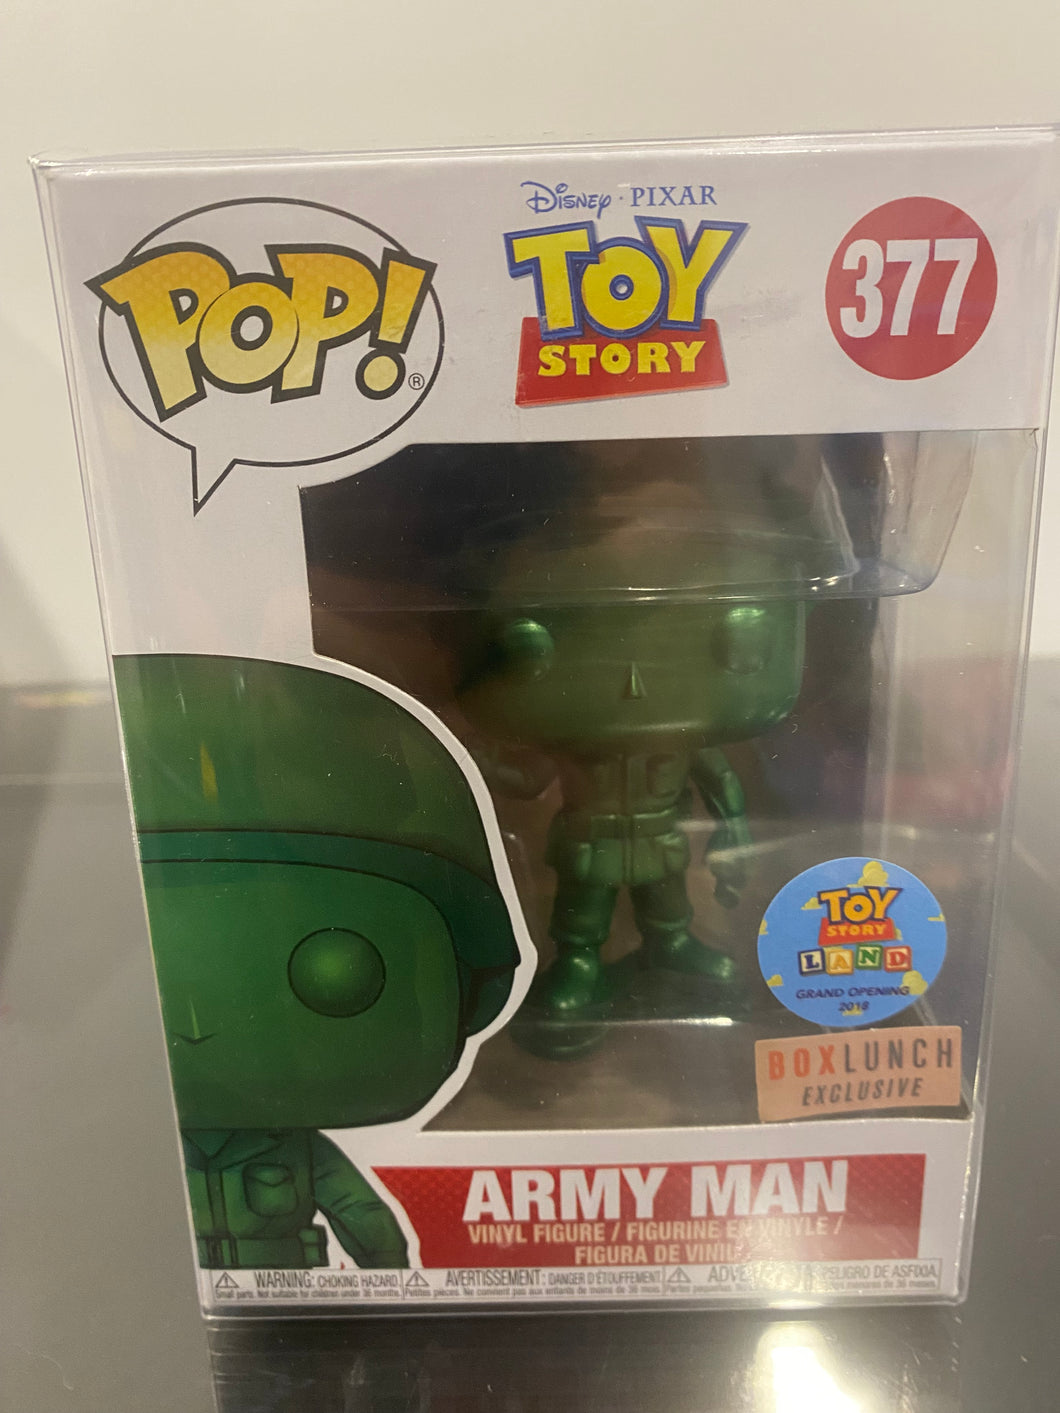 INSTOCK FUNKO TOY STORY ARMY MAN (METALLIC) BOX LUNCH EXCLUSIVE